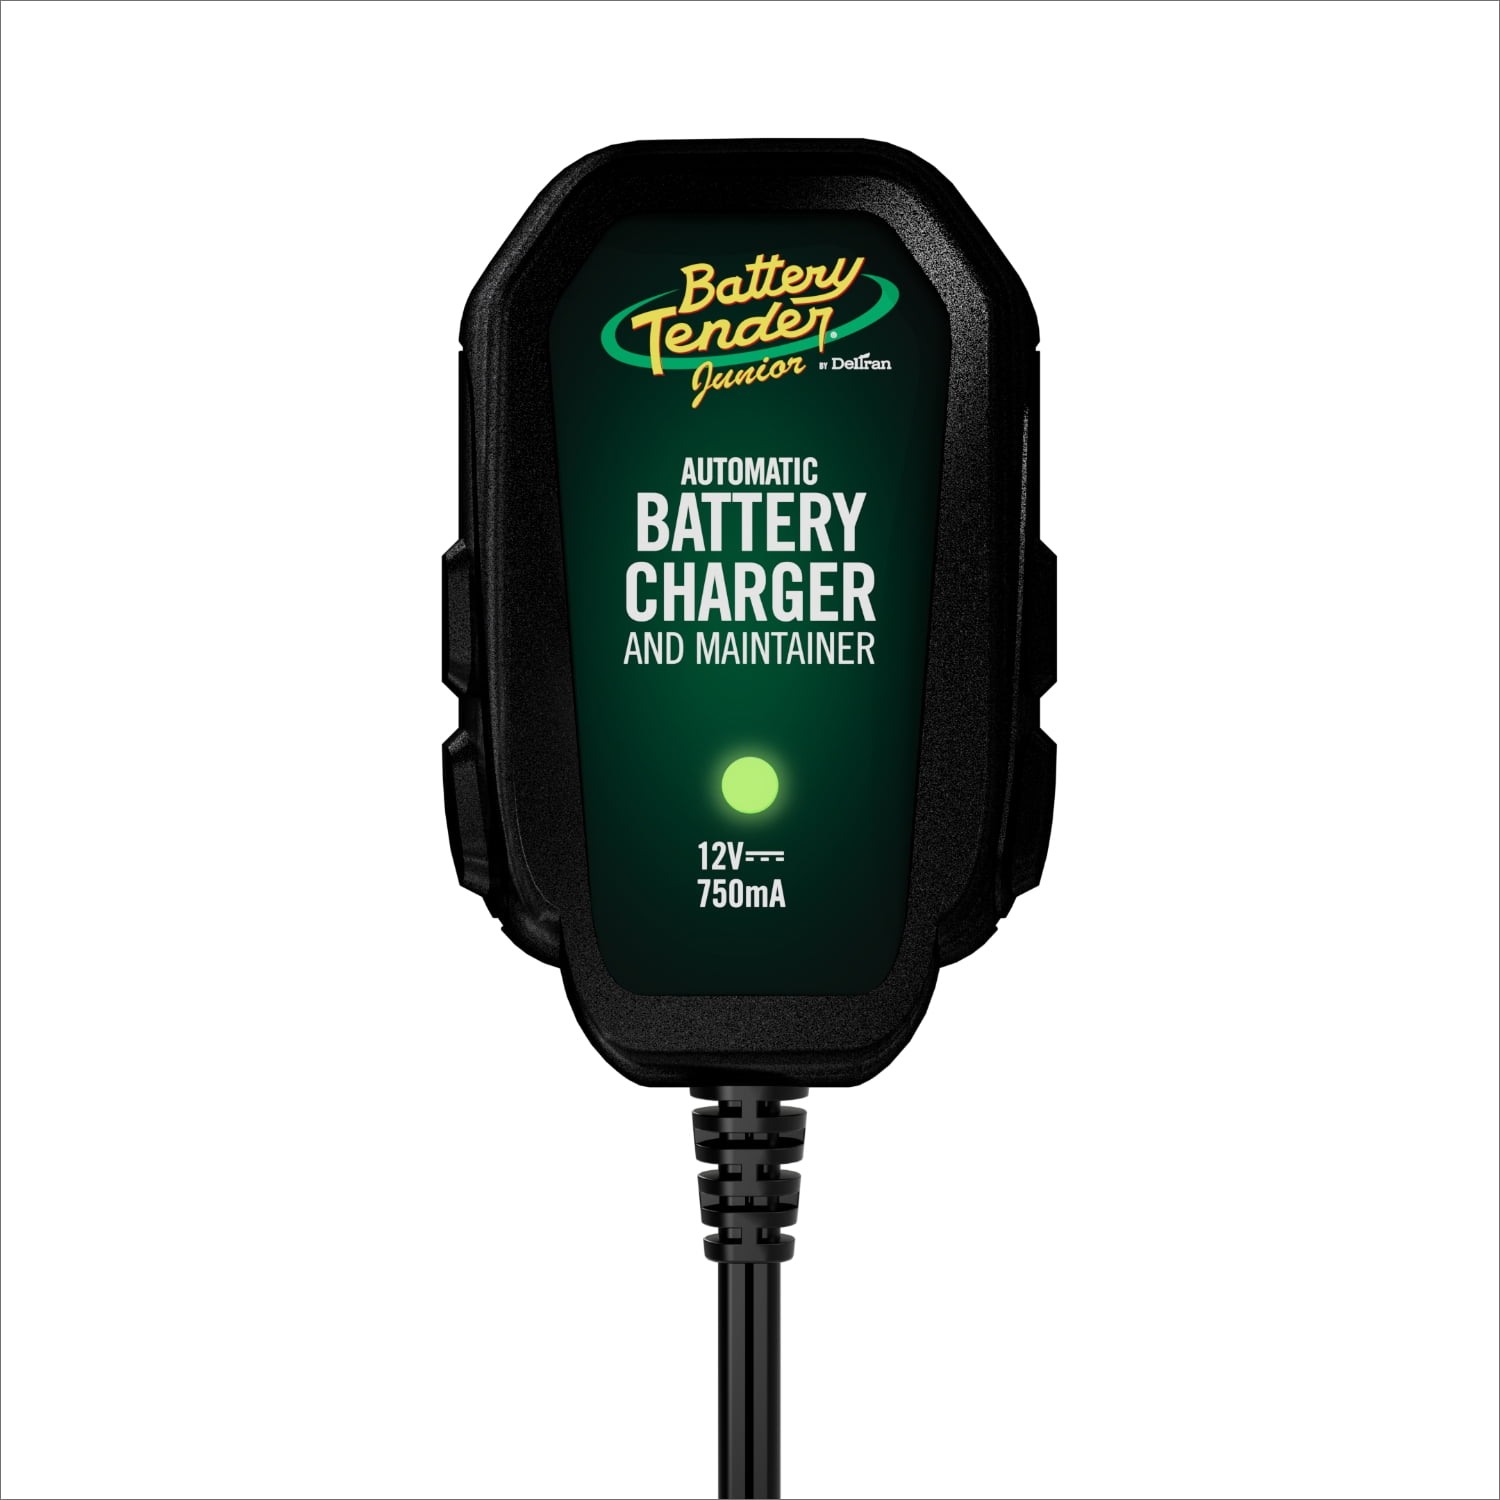 Chargeur Genius 2X2 2 sorties 2A - Chargeurs - BatterySet